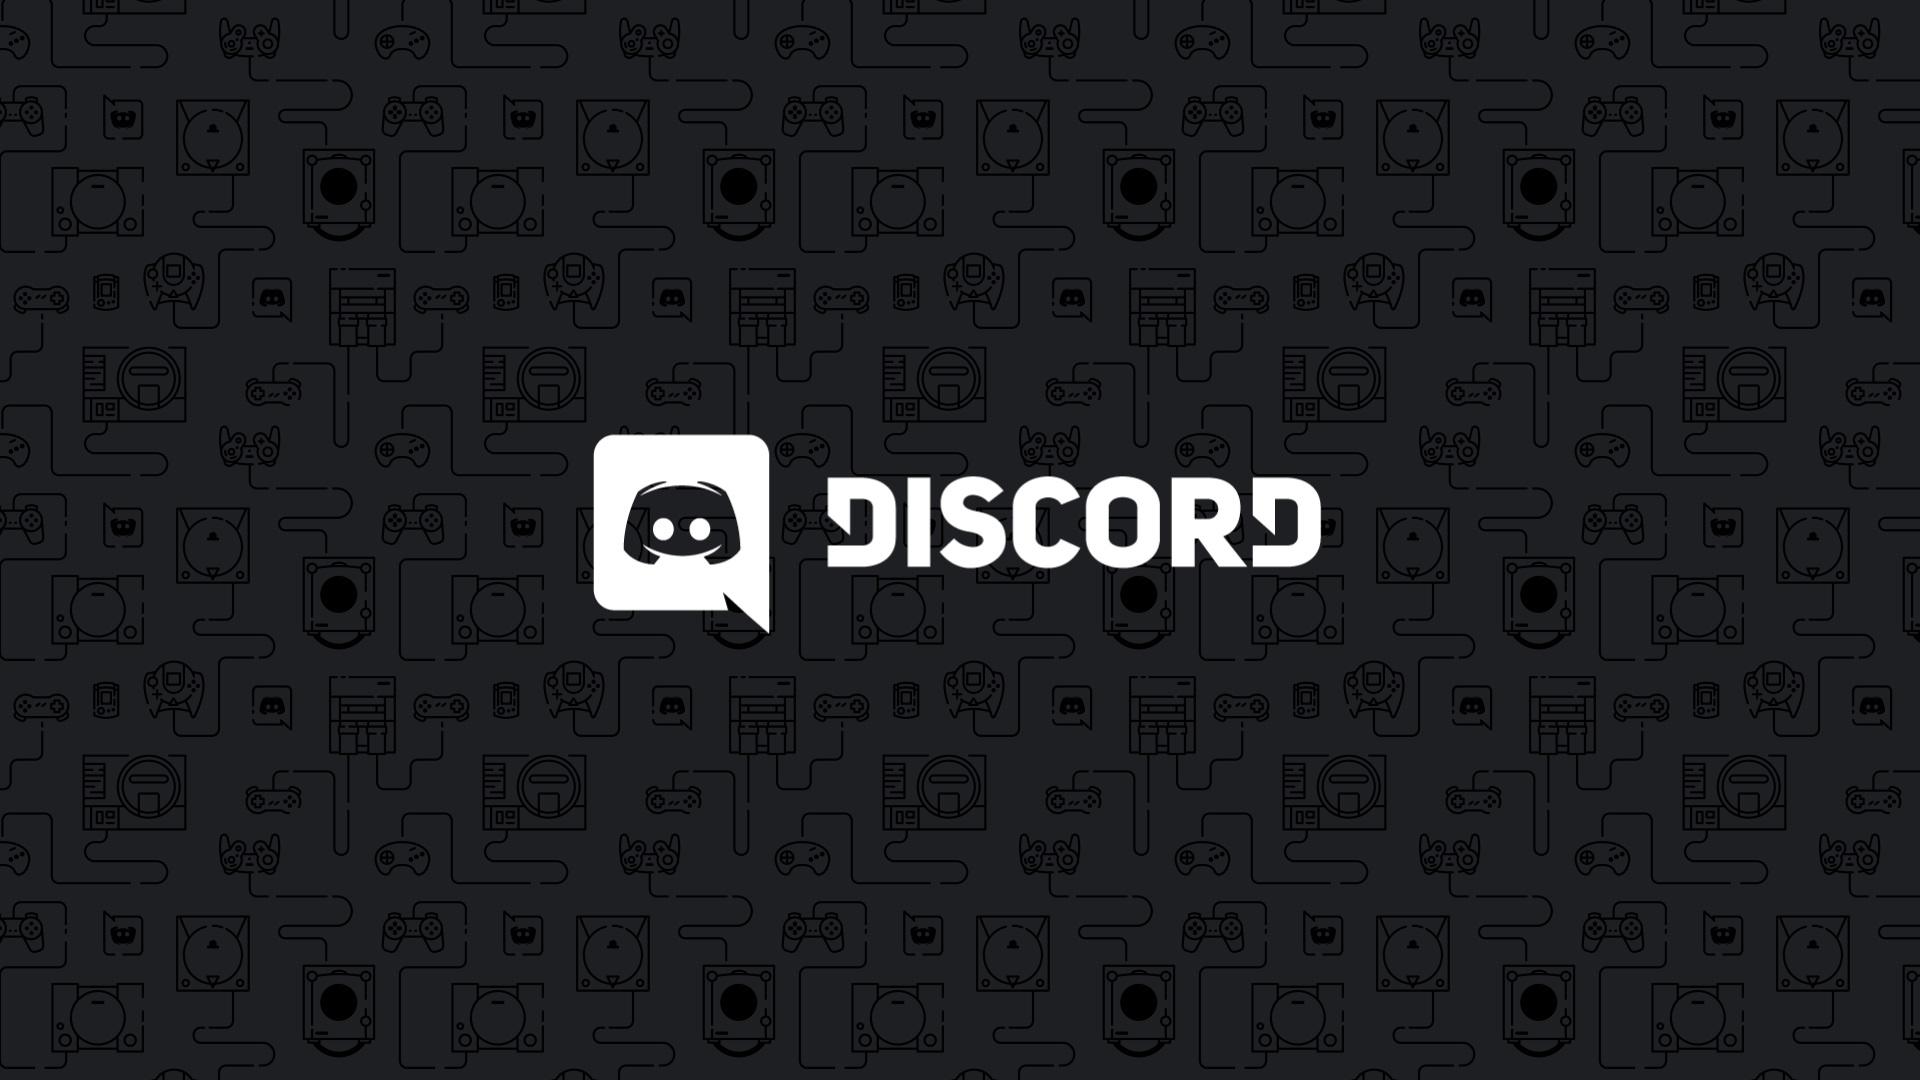 Get the best Black background discord for your server or chat background